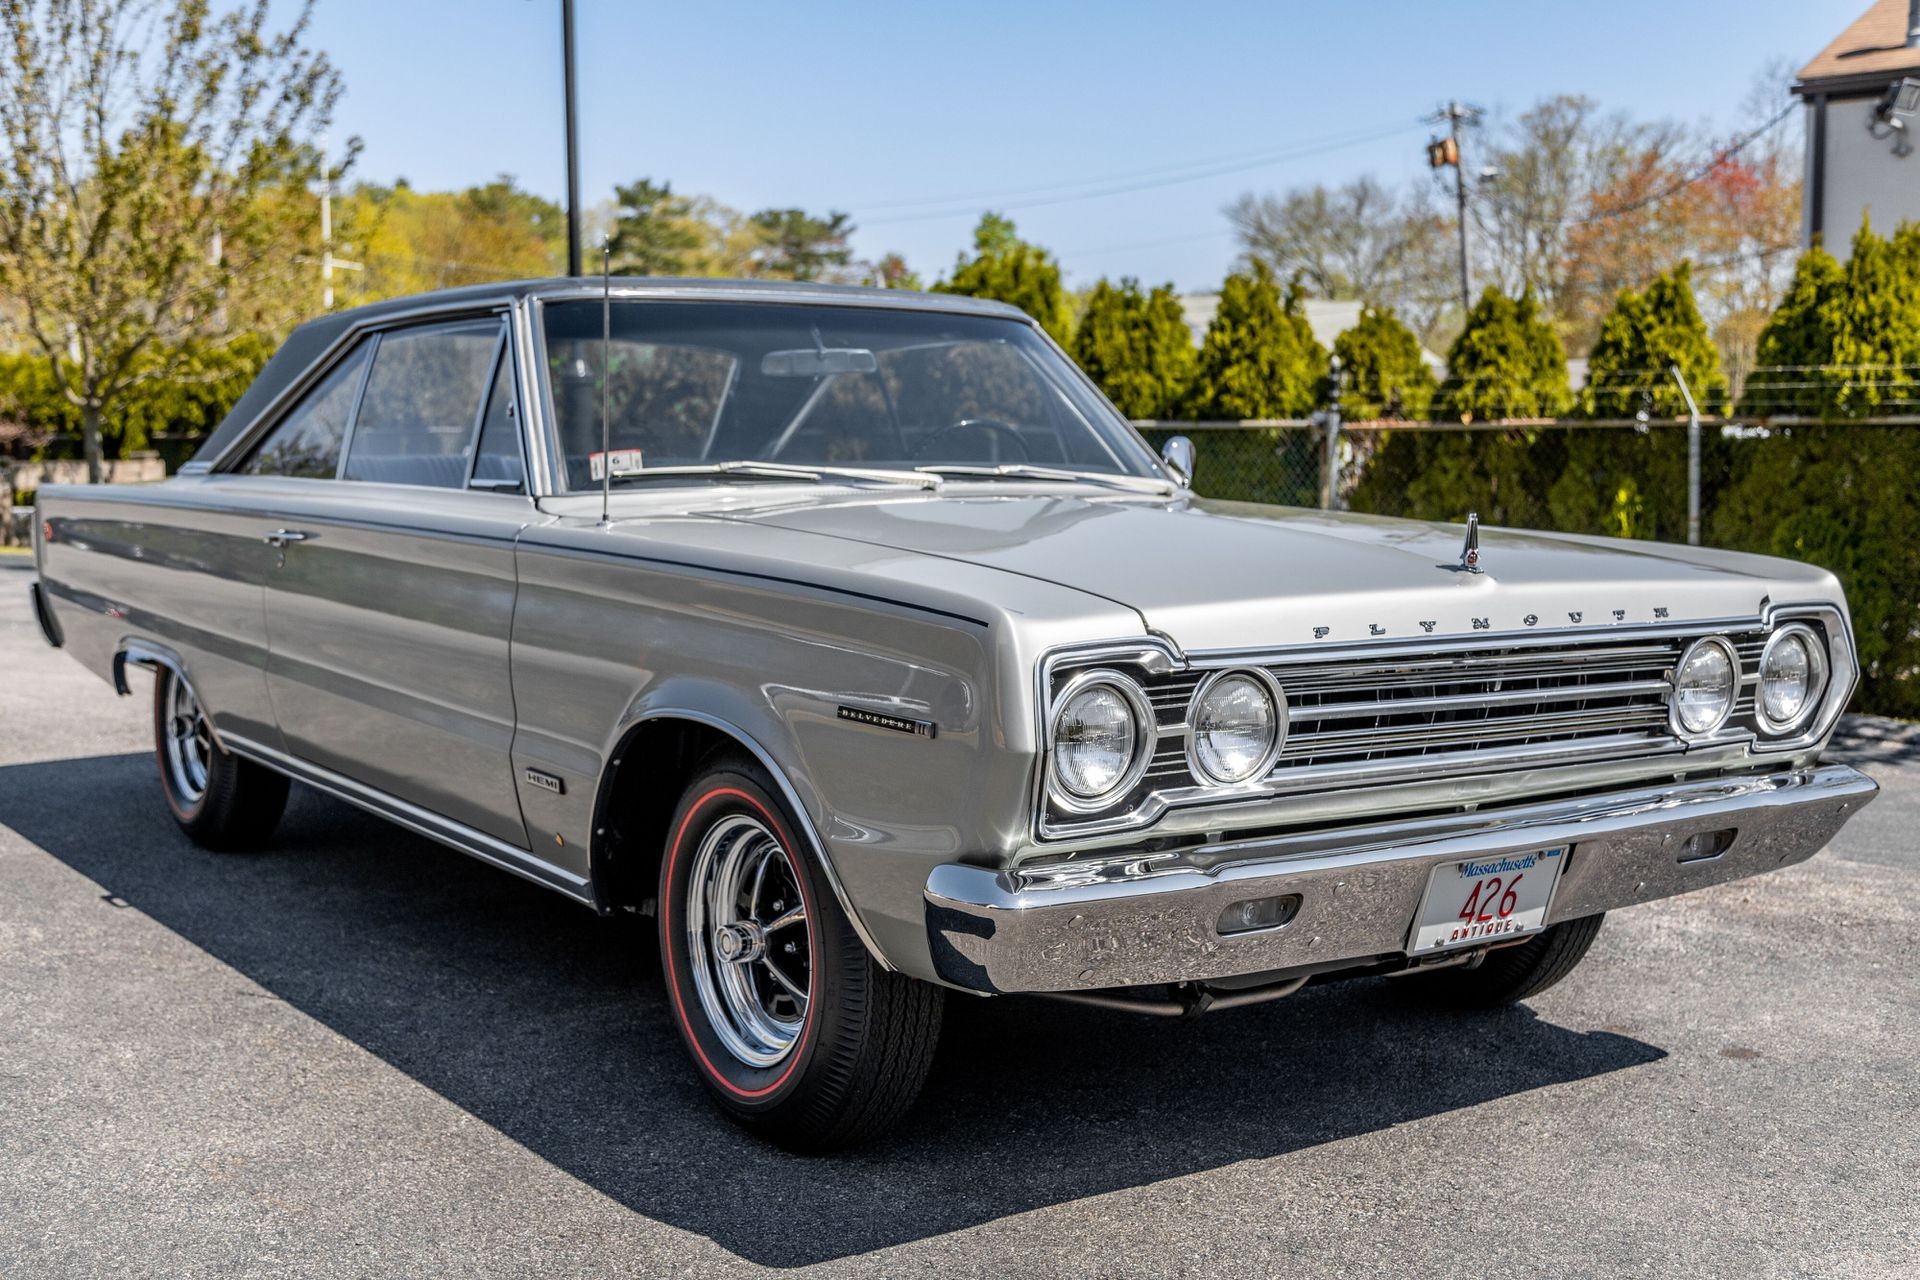 Find of the Day: This Rare 1967 Plymouth Belvedere II has a 426 Street Hemi